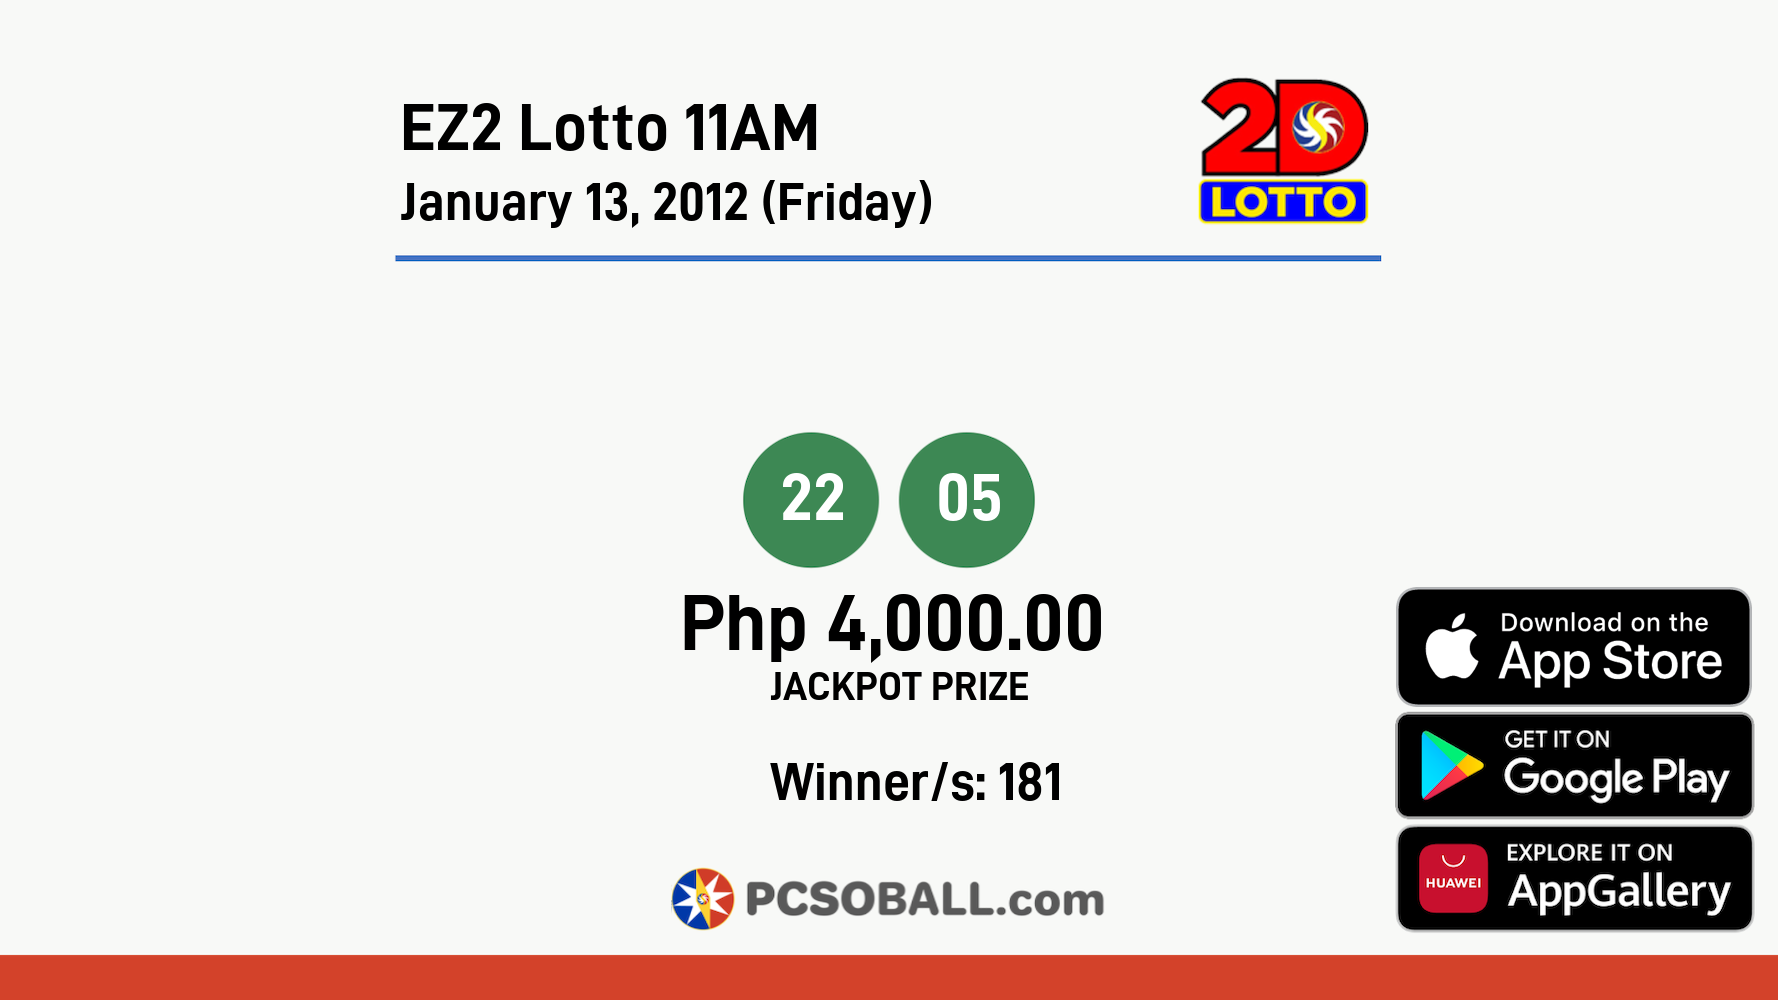 EZ2 Lotto 11AM January 13, 2012 (Friday) Result